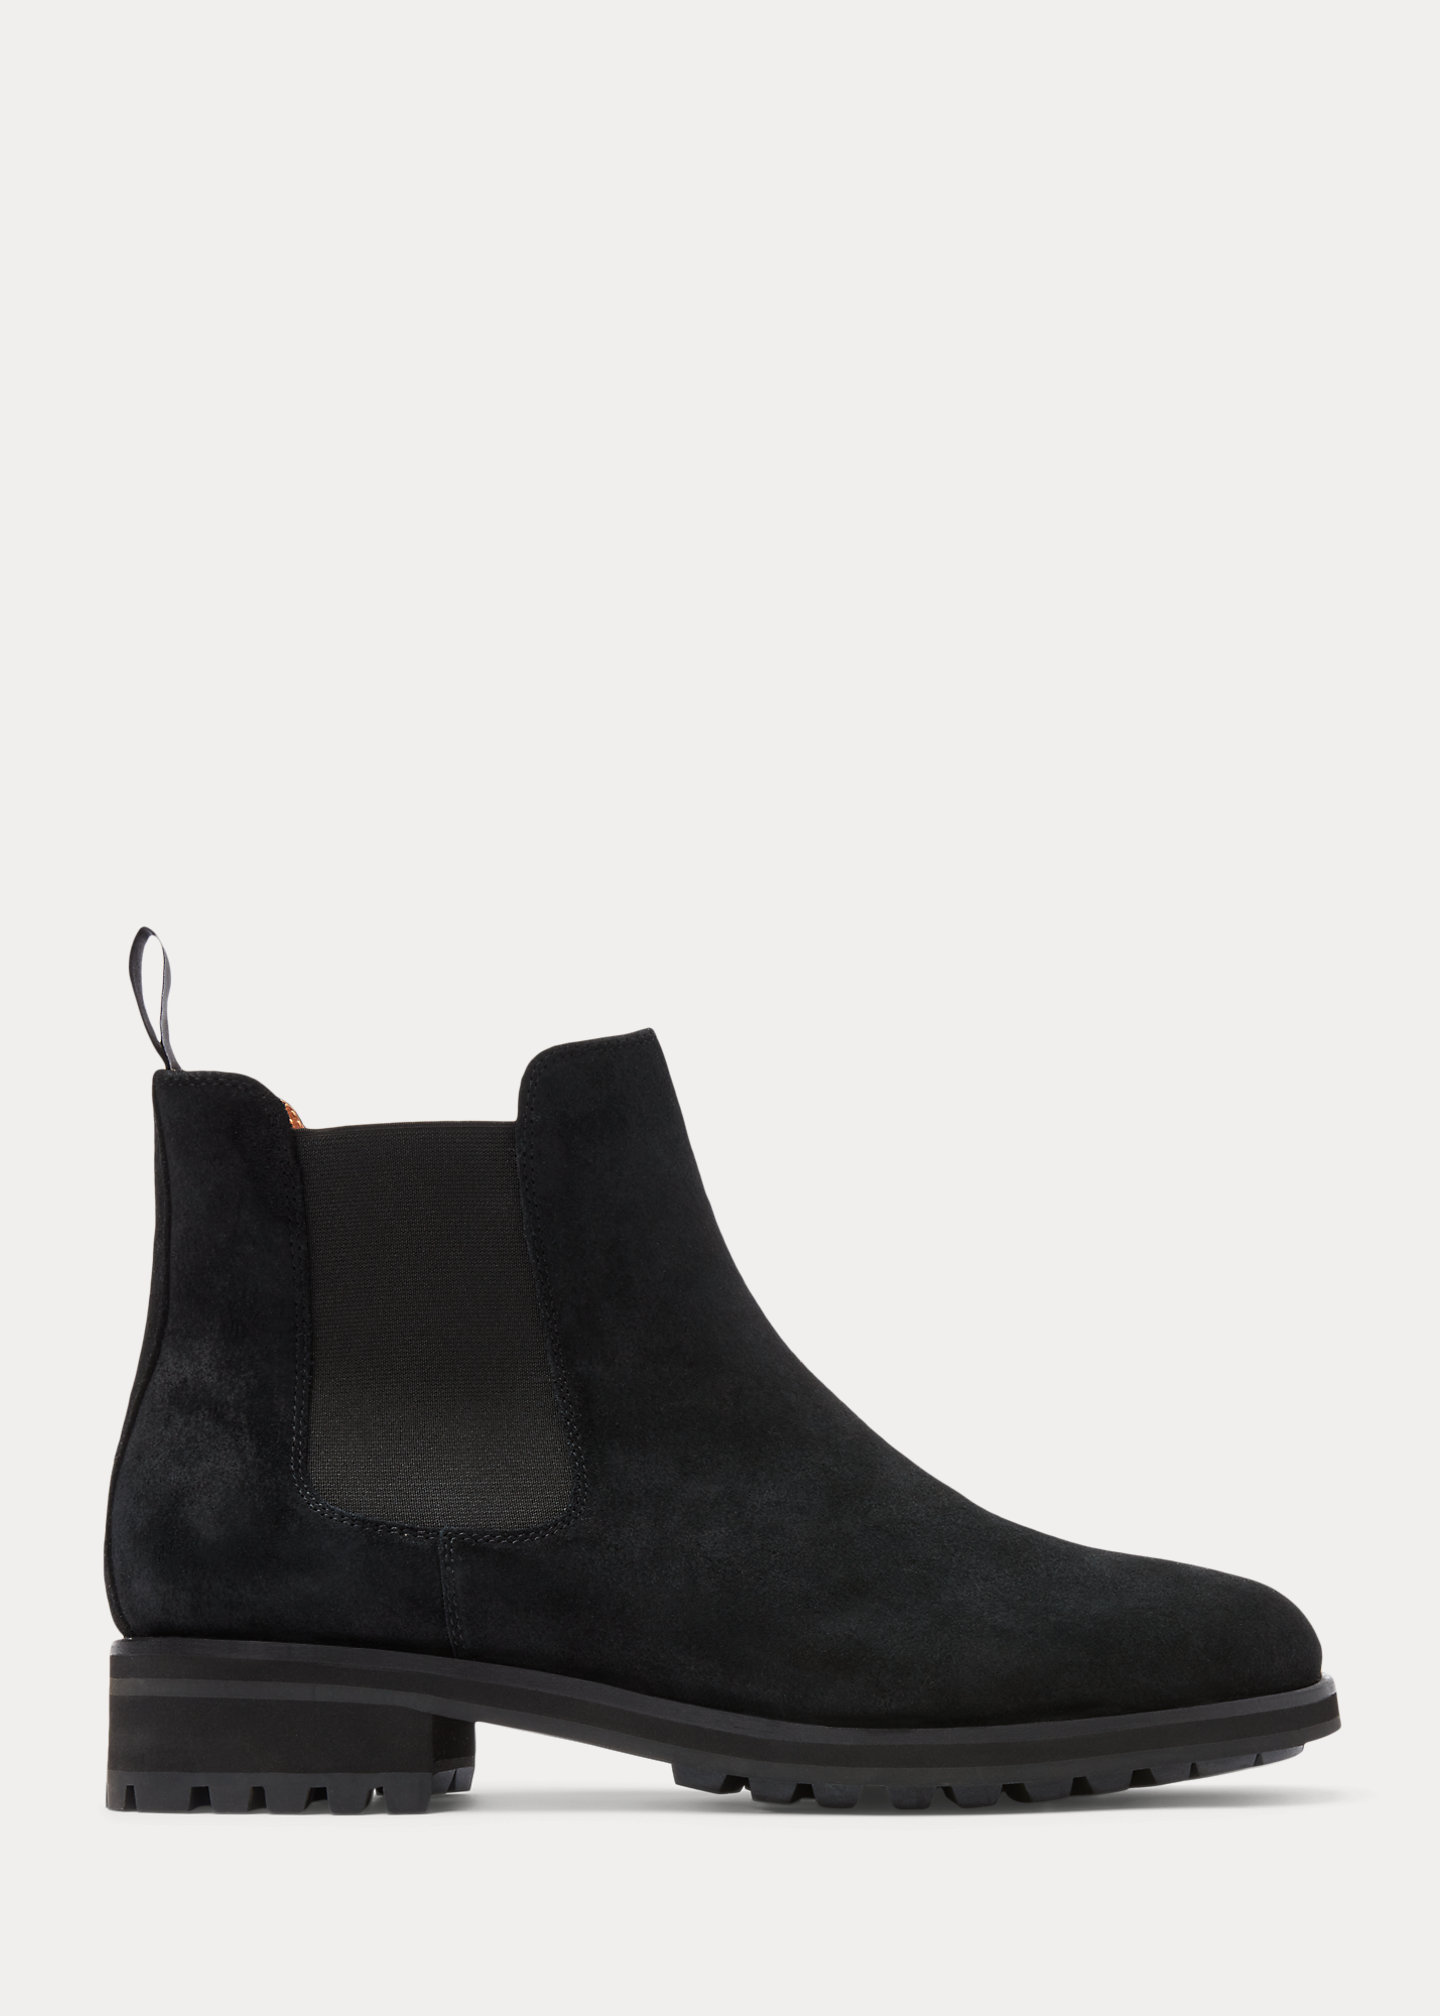 Bryson Waxed Suede Chelsea Boot